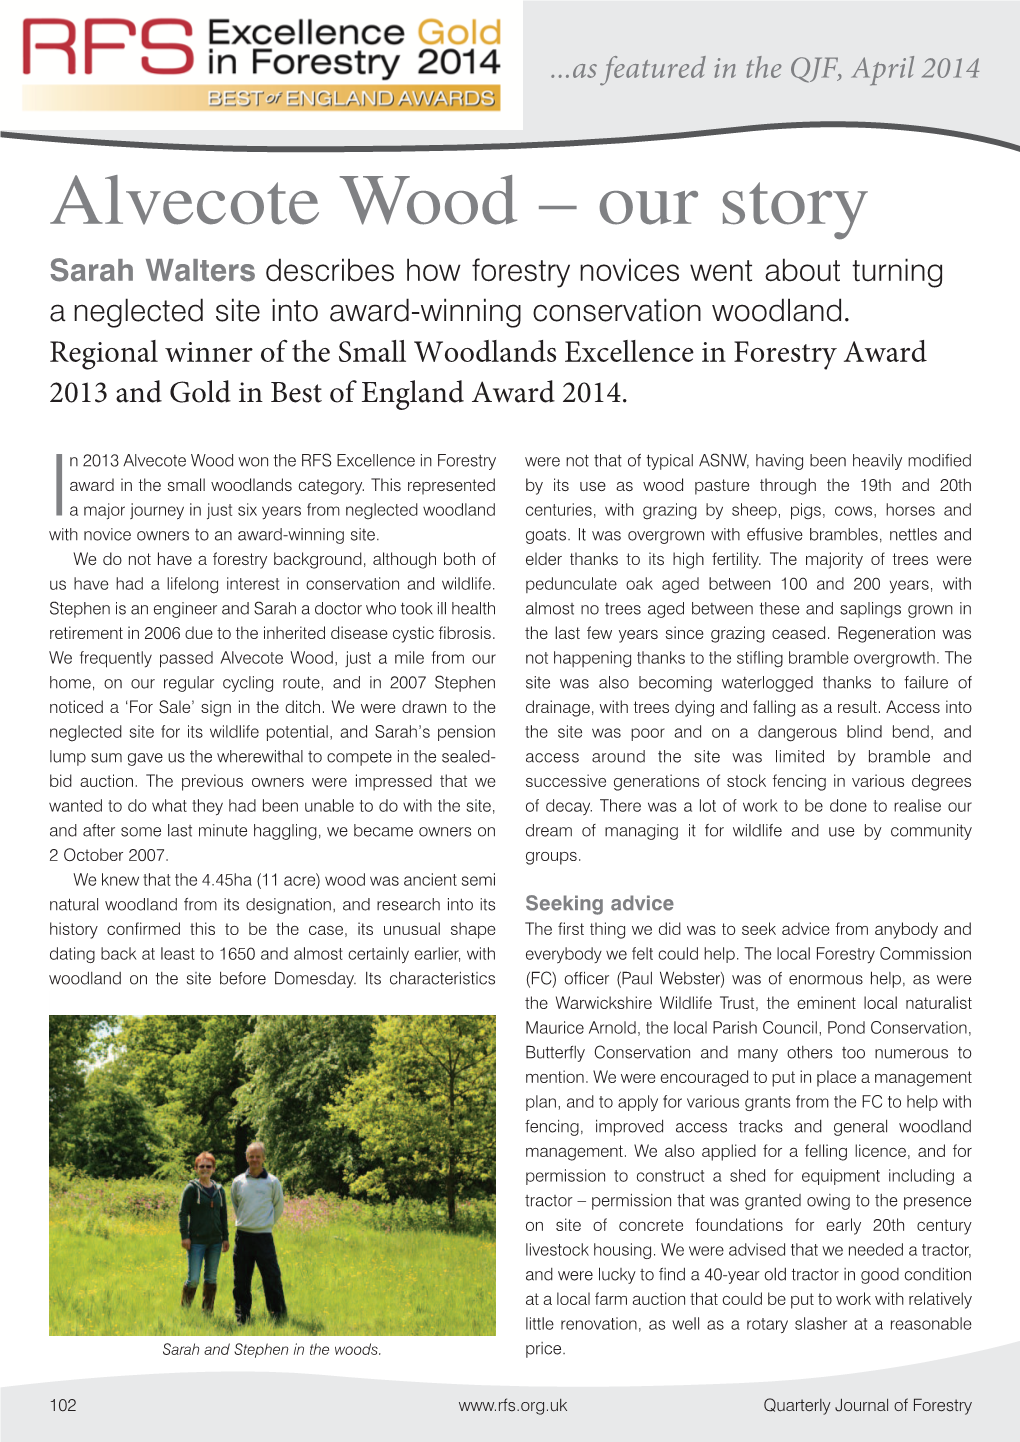 Alvecote Wood – Our Story Sarah Walters Describes How Forestry Novices Went About Turning a Neglected Site Into Award-Winning Conservation Woodland